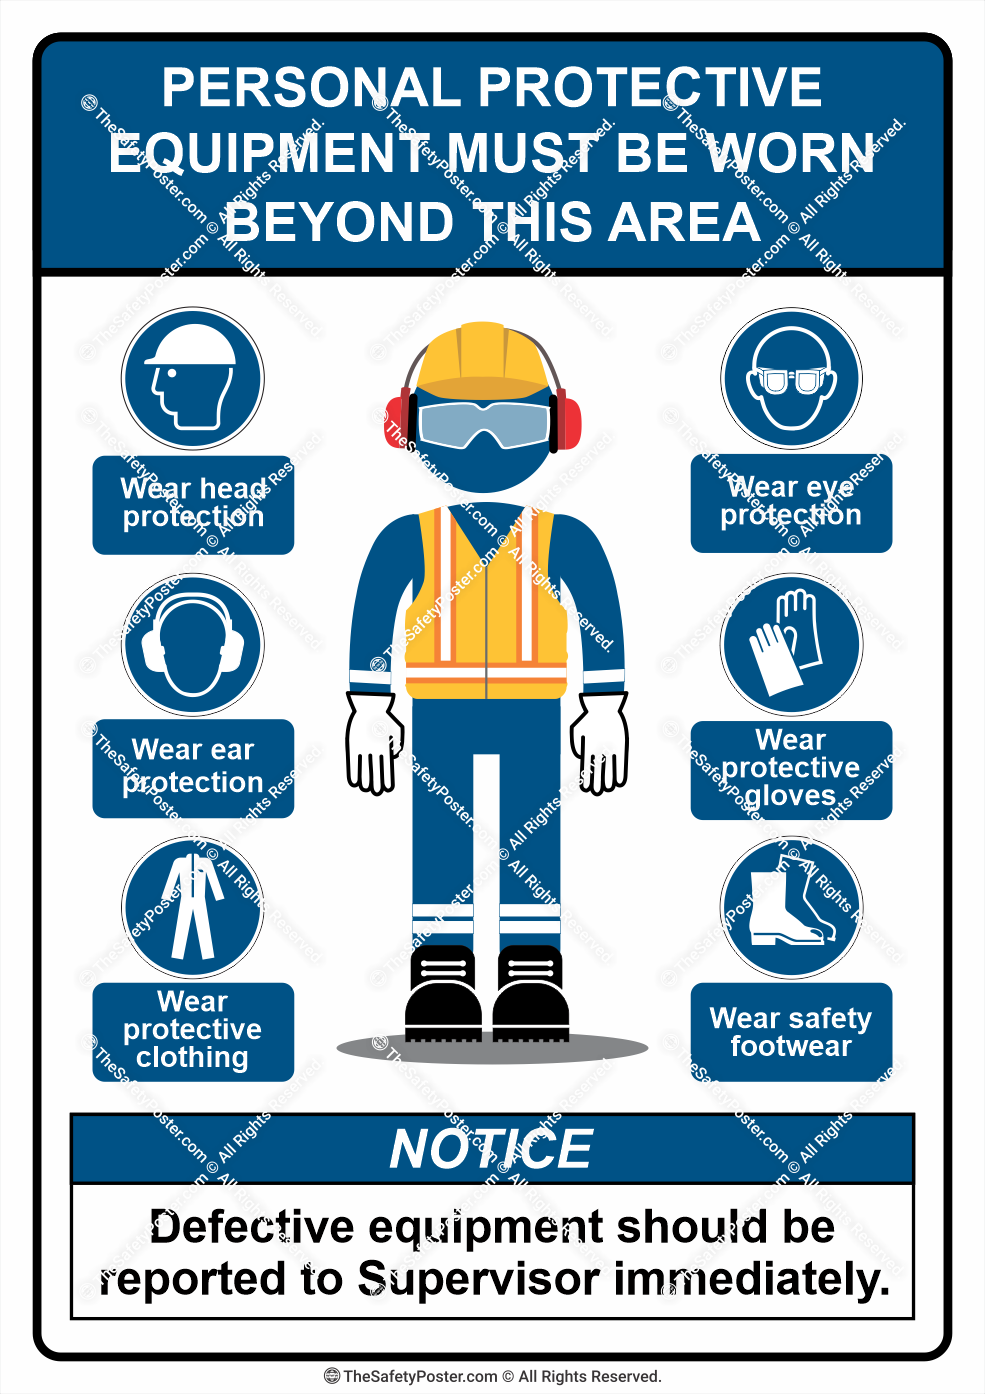 Ppe Posters Safety Poster Shop Health And Safety Poster Workplace Riset